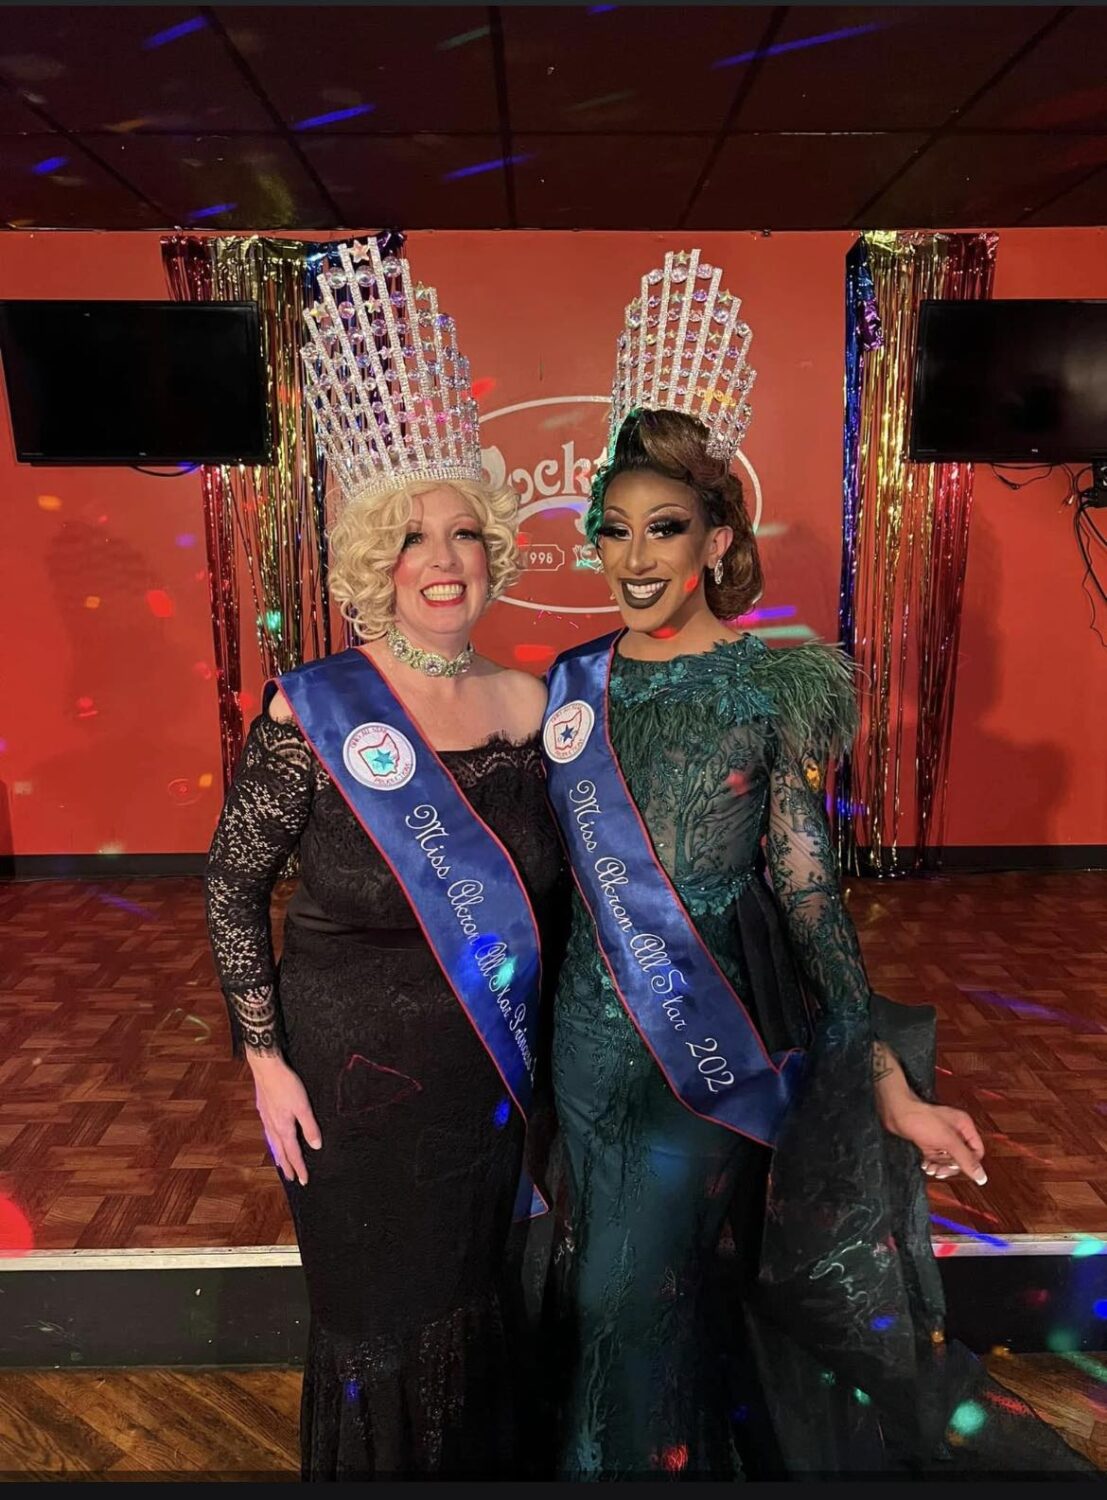 Ivy Valentino St. Foxx (Newly crowned Miss Akron All-Star Princess 2023) and Pineapple Peruu (Newly Crowned Miss Akron All-Star 2023)  | Akron All-Star Pageant | Cocktails (Akron, Ohio) | 2/18/2023